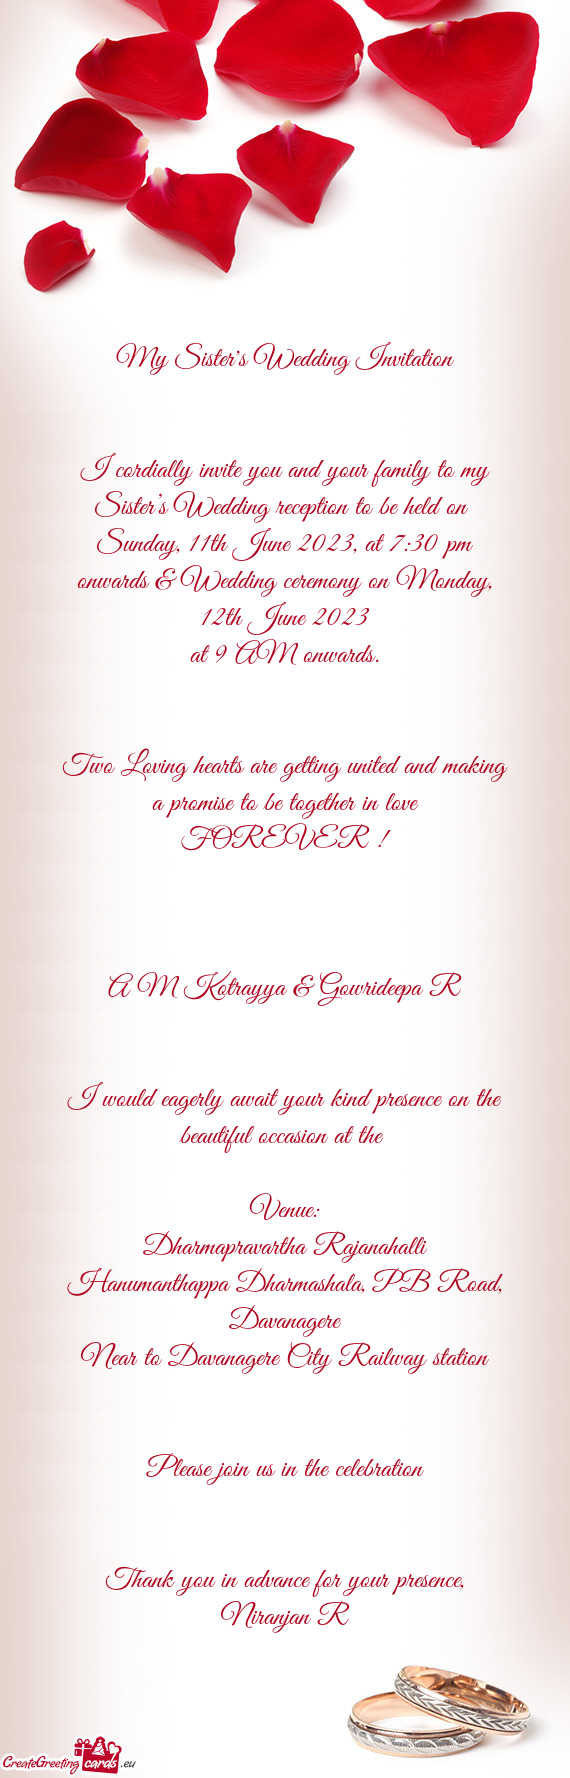 Sunday, 11th June 2023, at 7:30 pm onwards & Wedding ceremony on Monday, 12th June 2023